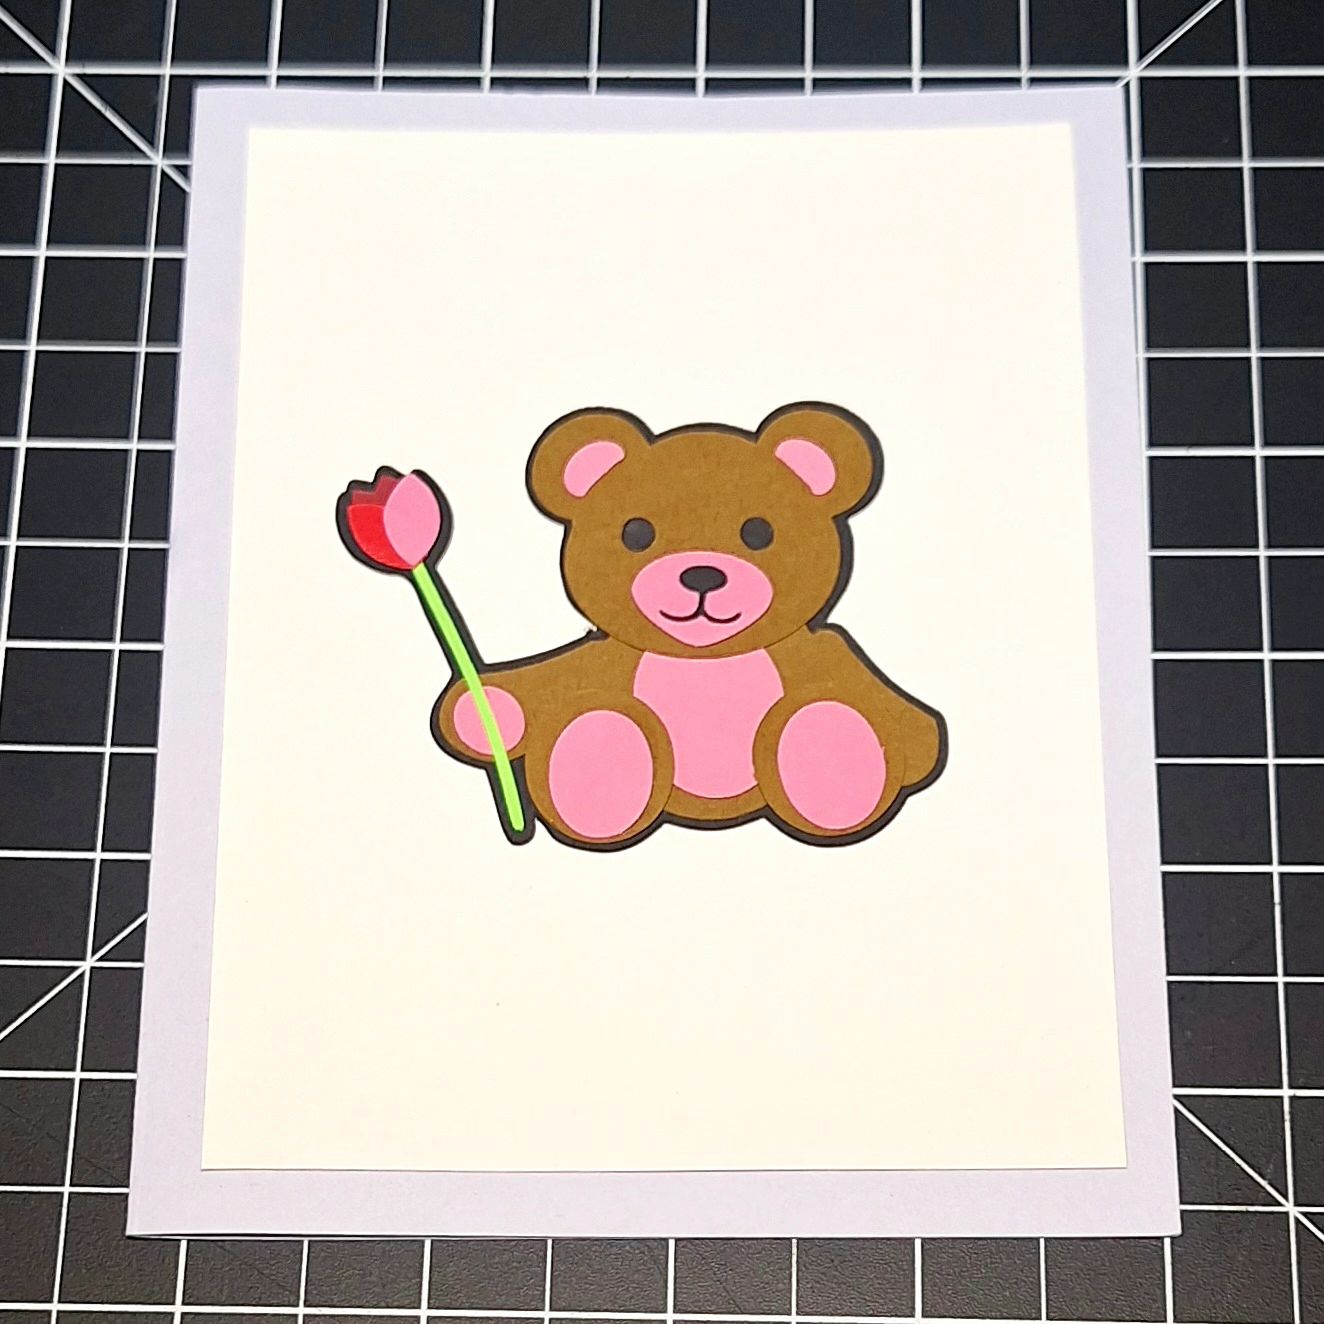 Teddy bear holding a tulip card 5.5x4.25 I had some on purple and a few on blue and 1 with foam #teddy #teddybear #cardmaking #card #tulip #papercrafts #papercraft